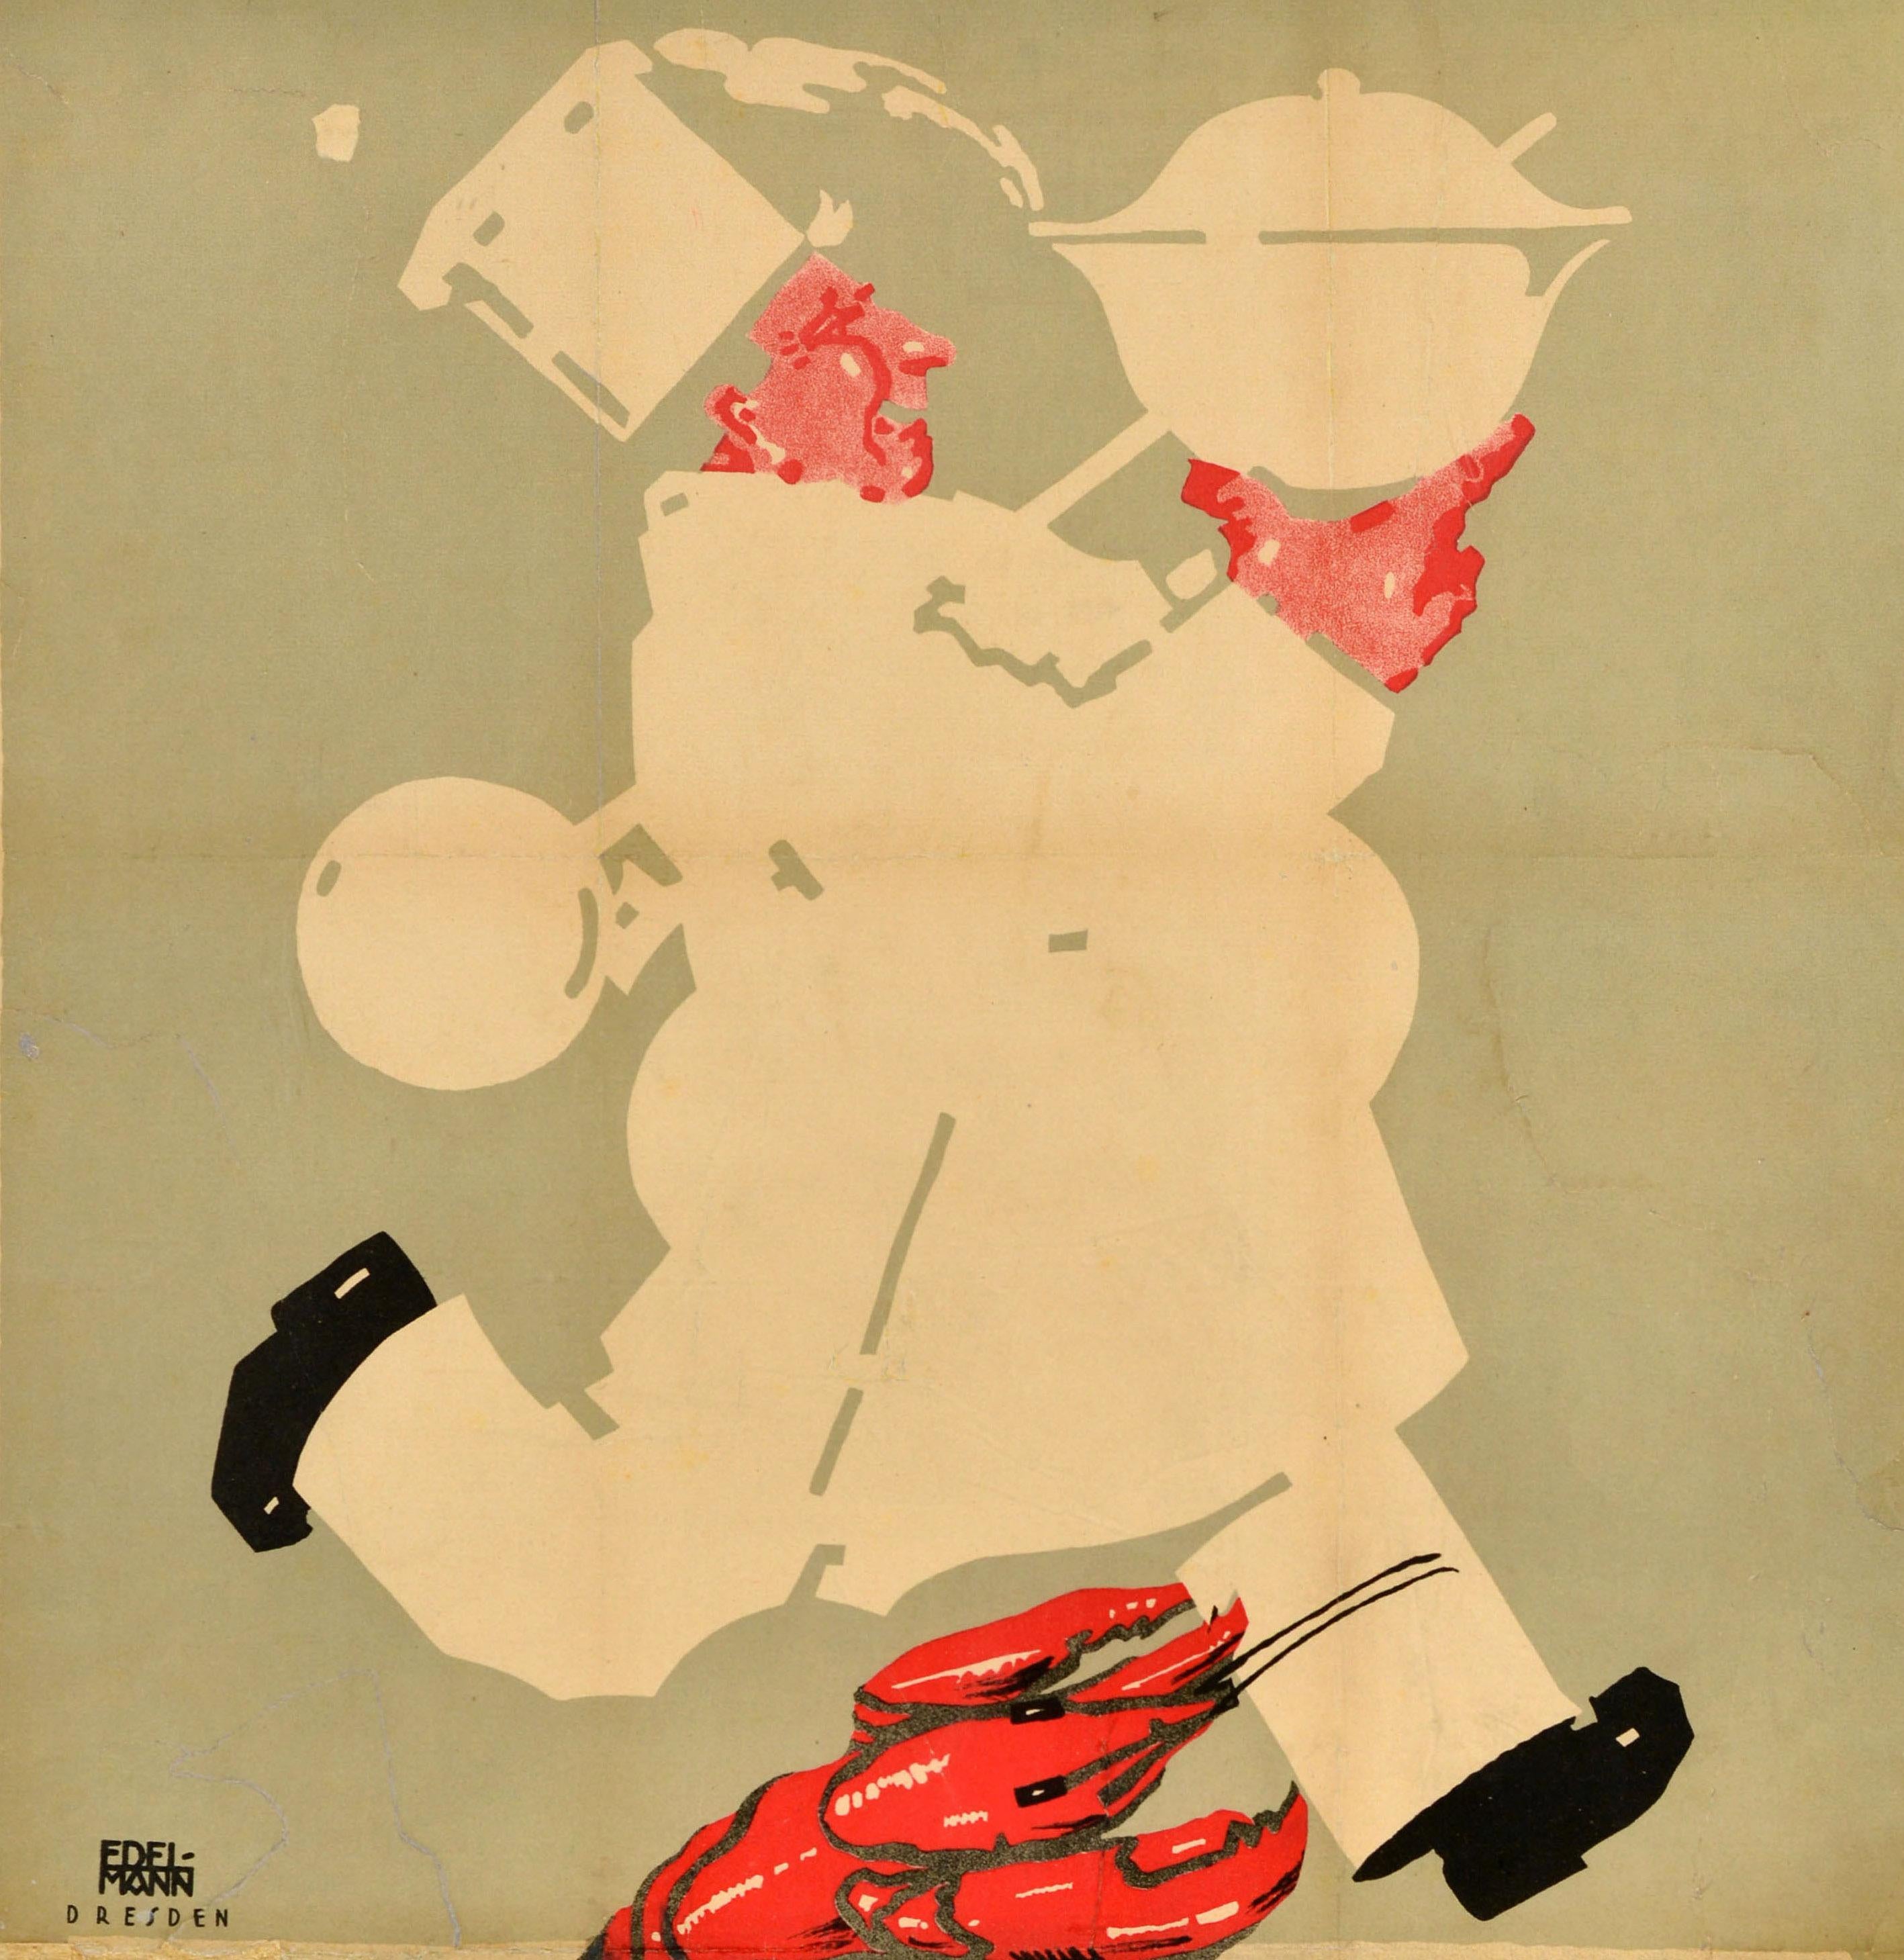 Original antique cooking event advertising poster - Austellung fur Kochskunst und Verwandte Gewerbe Dresden 1922 / Exhibition for Culinary Arts and Related Trades 25 to 18 March - featuring a great design depicting a chef running while holding up a